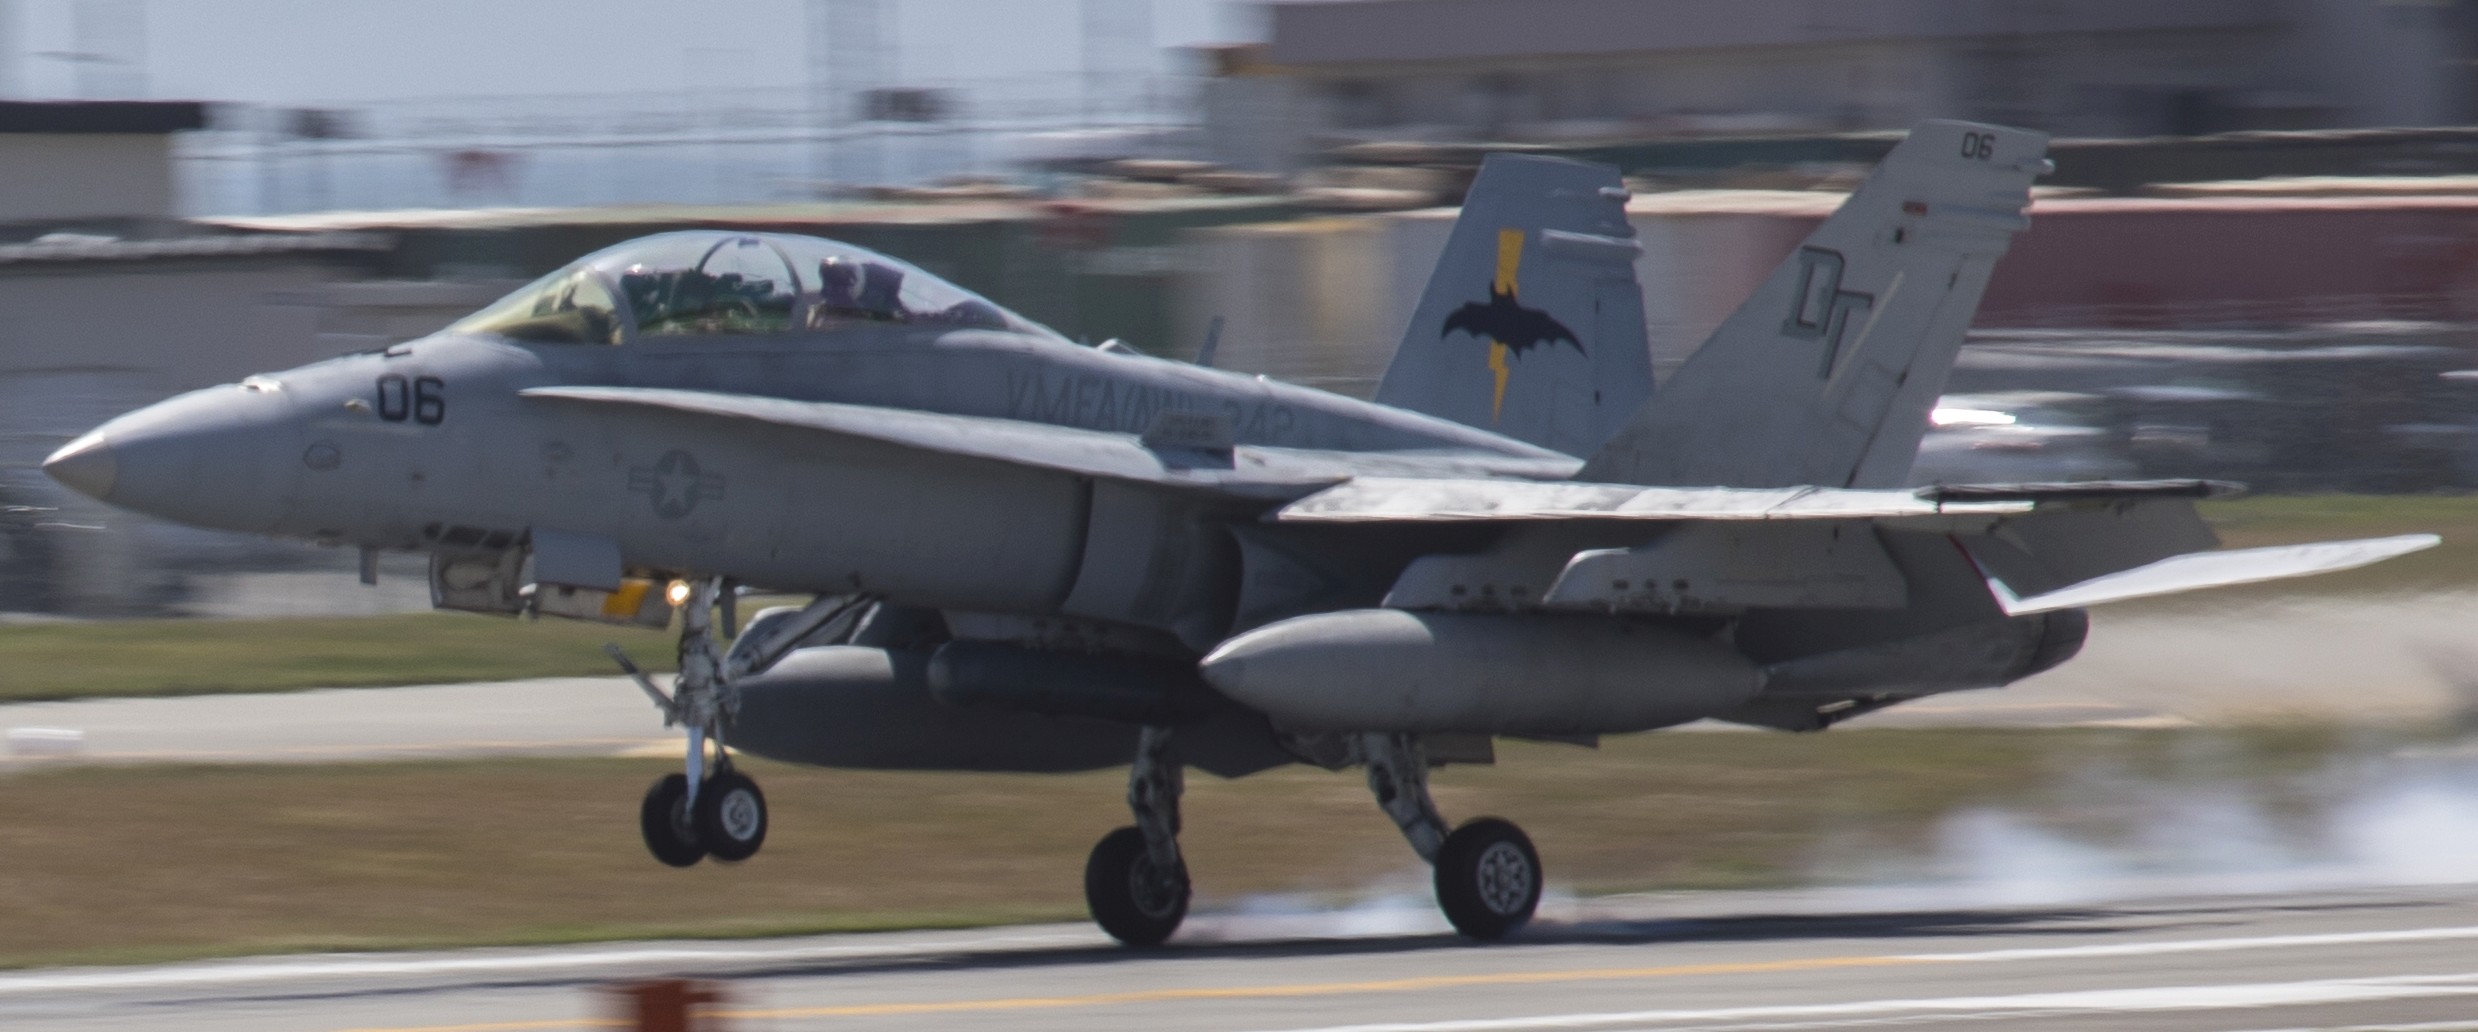 vmfa(aw)-242 bats marine all-weather fighter attack squadron usmc f/a-18d hornet 73